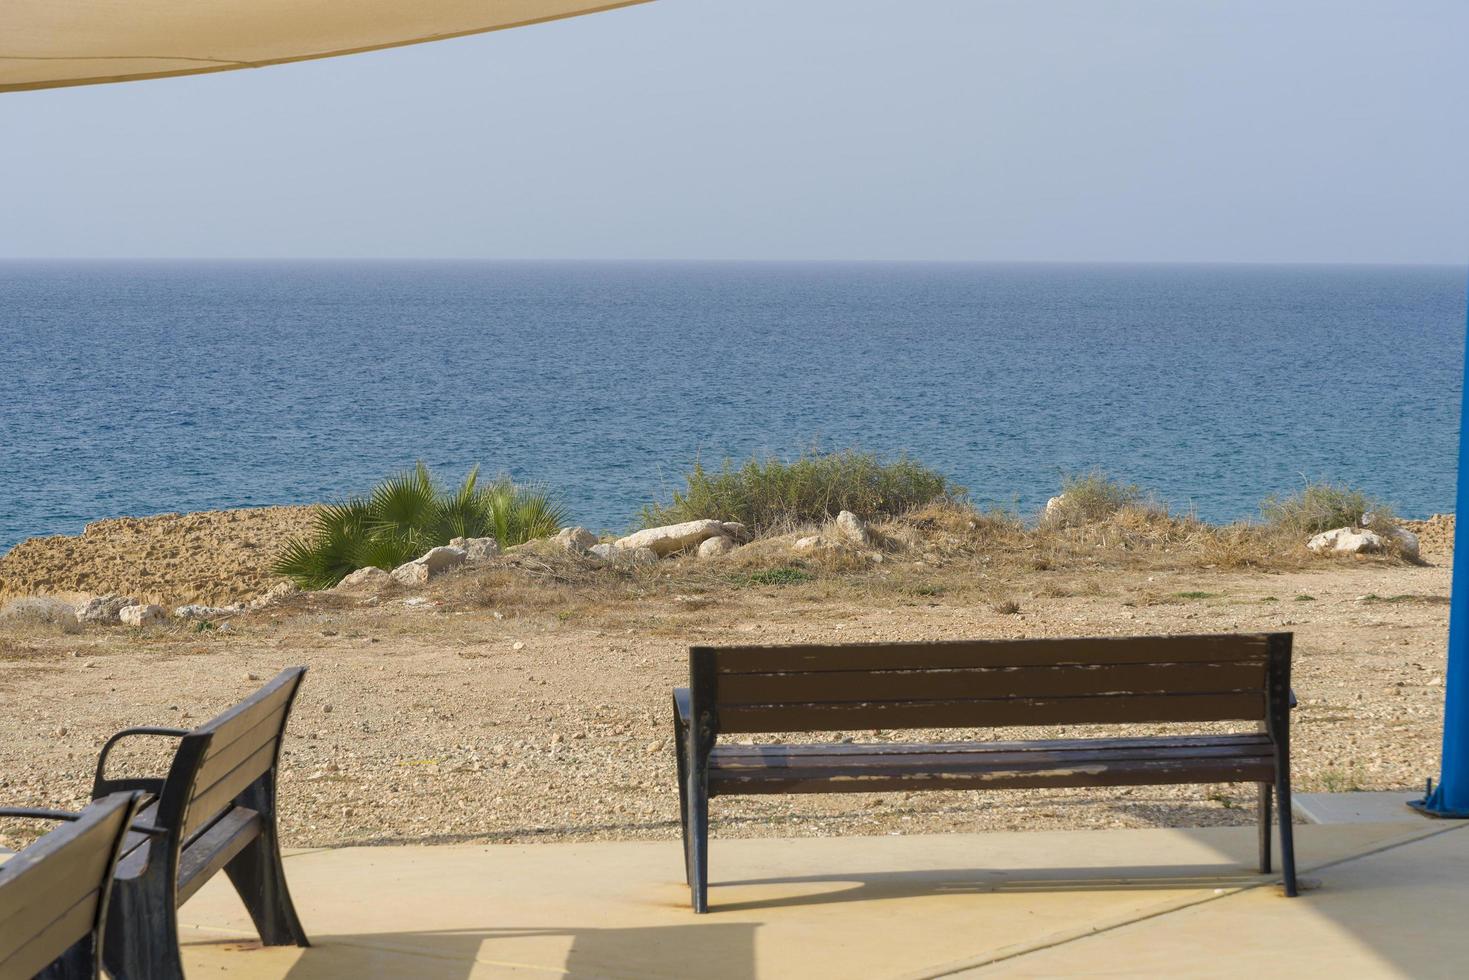 Benches overlooking the sea on the island of Cyprus, near Paphos. photo